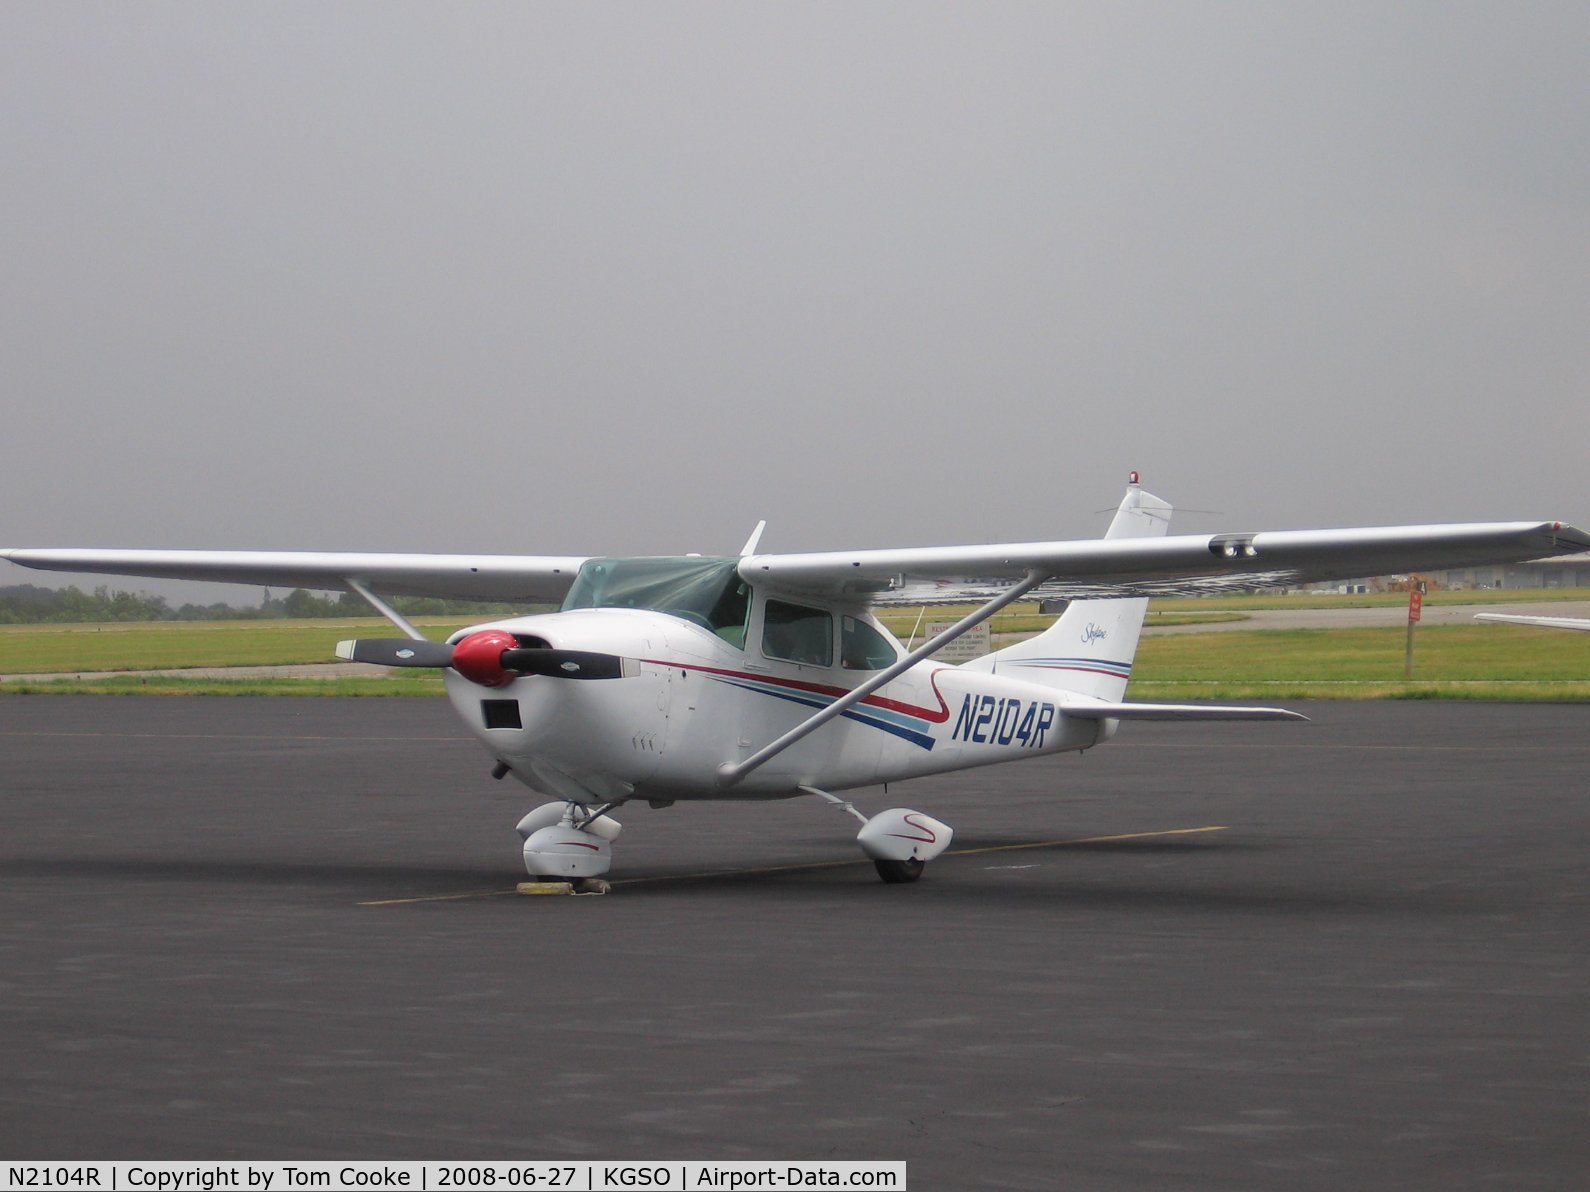 N2104R, 1964 Cessna 182G Skylane C/N 18255304, very friendly folks arrived in this 182 to wait out storms